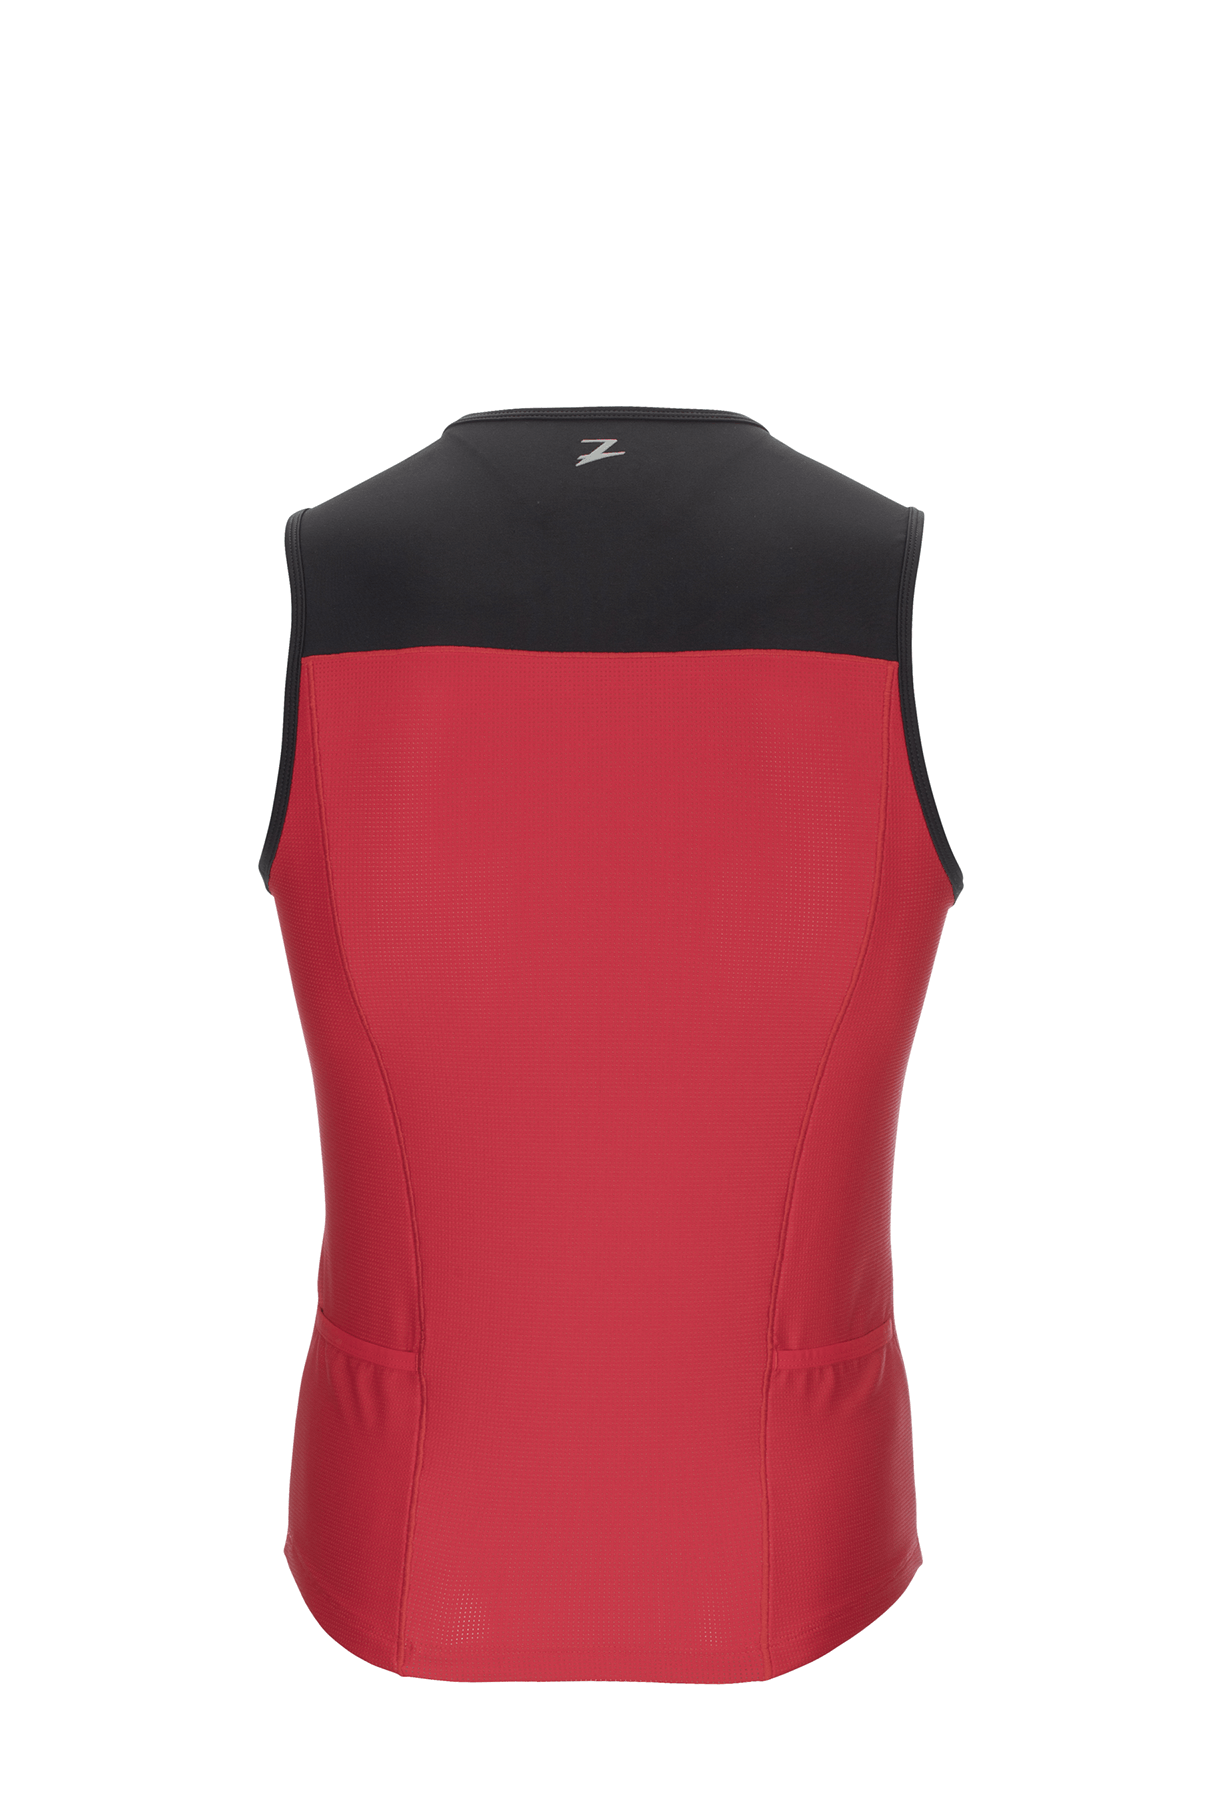 Men's Active Tri Mesh Tank - Race Day Red